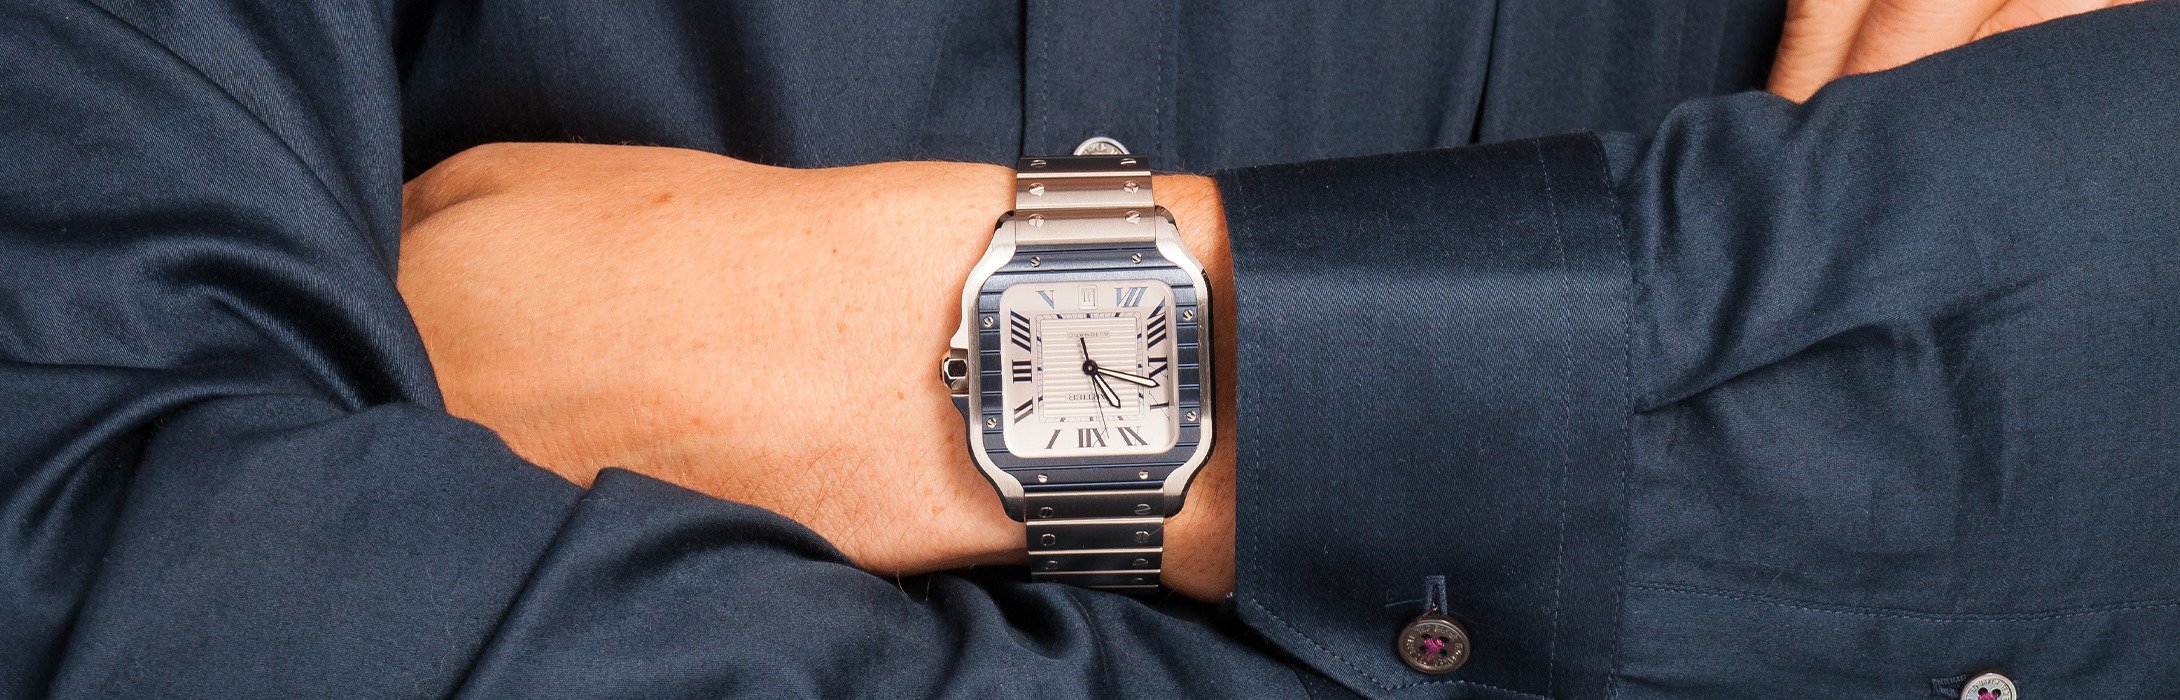 Cartier Watches for Men Ultimate Buying Guide - Bob's Watches